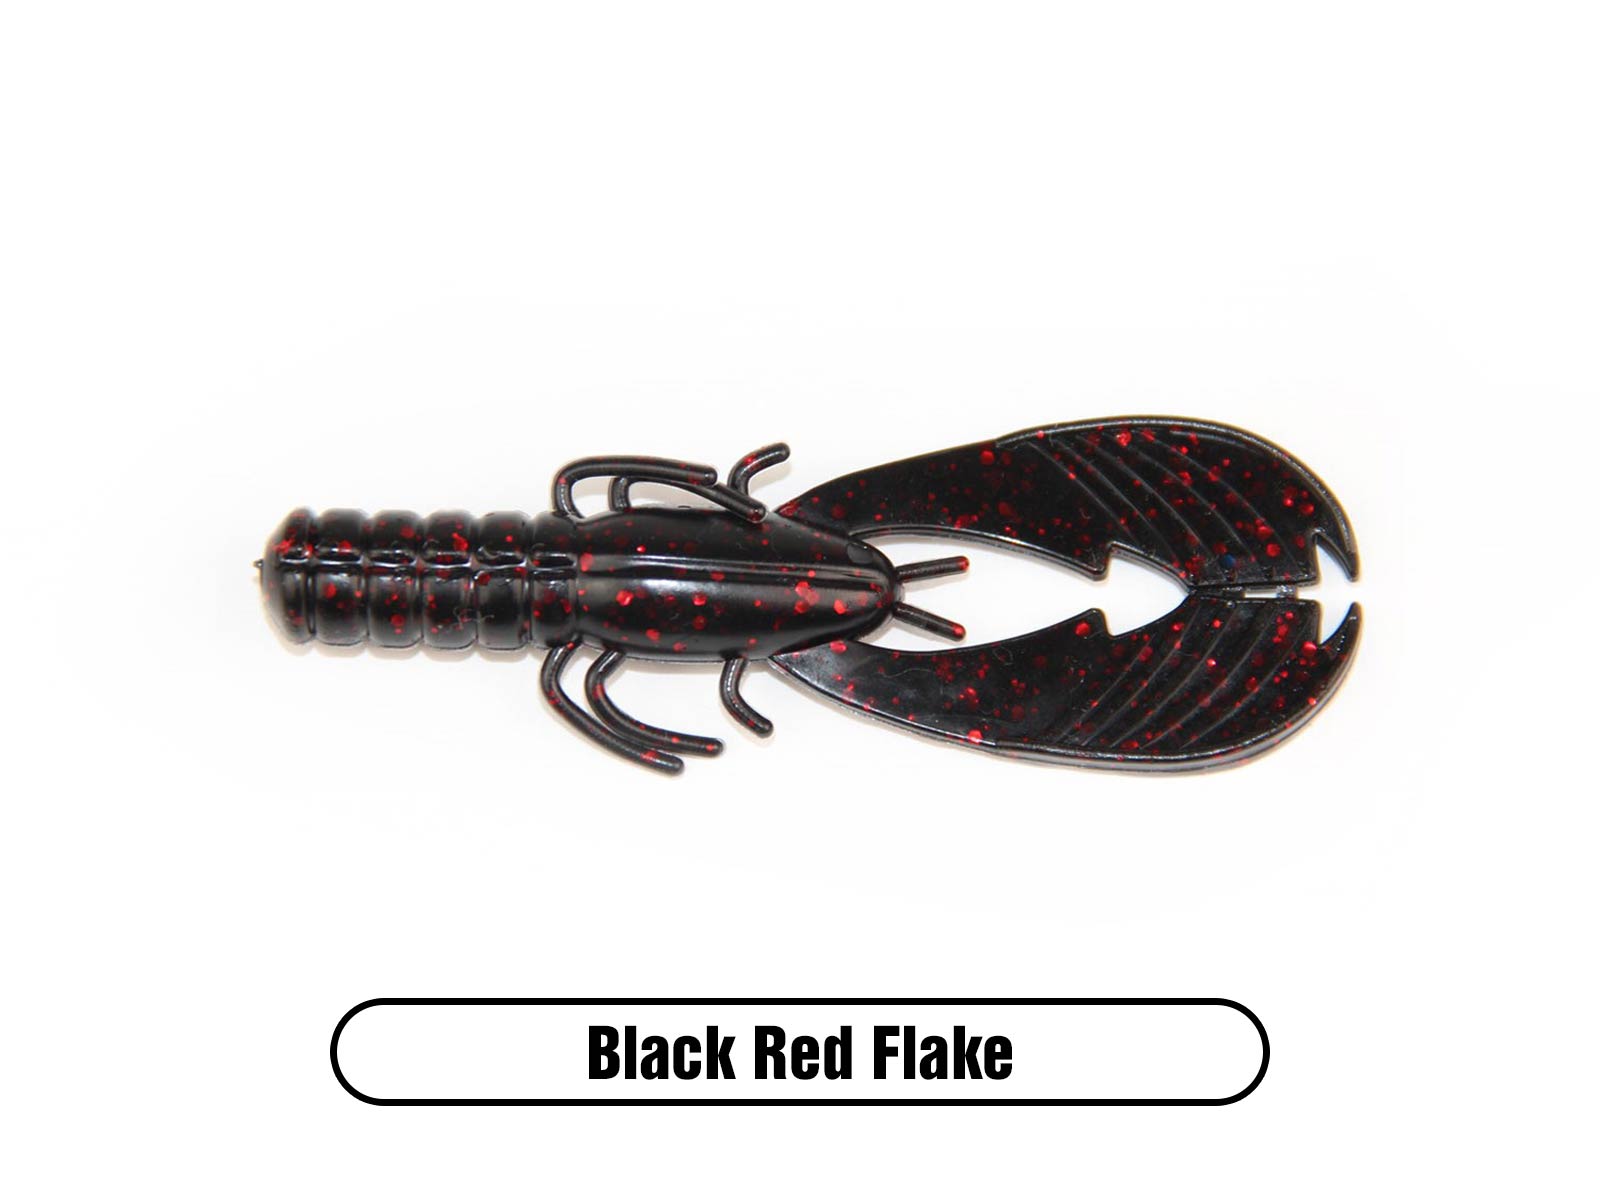 Muscle Back Finesse Craw 3.25 (8 Pack) – X Zone Lures